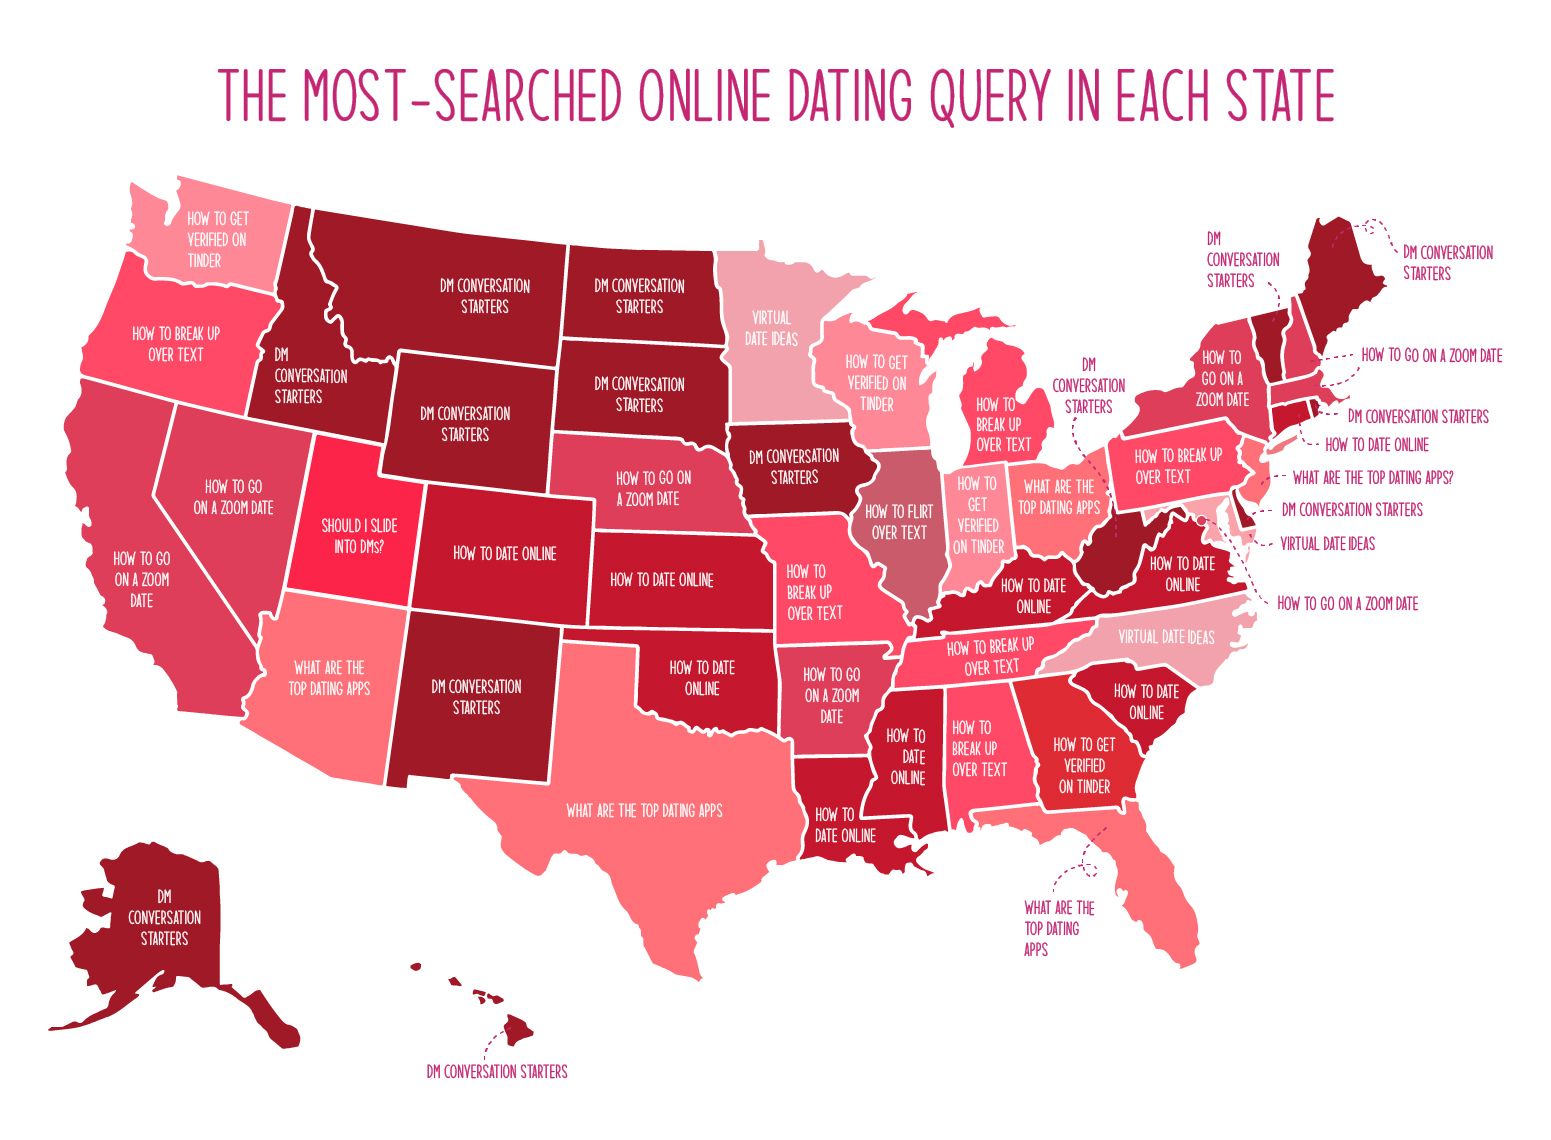 Here's Georgia's most Googled question about online dating